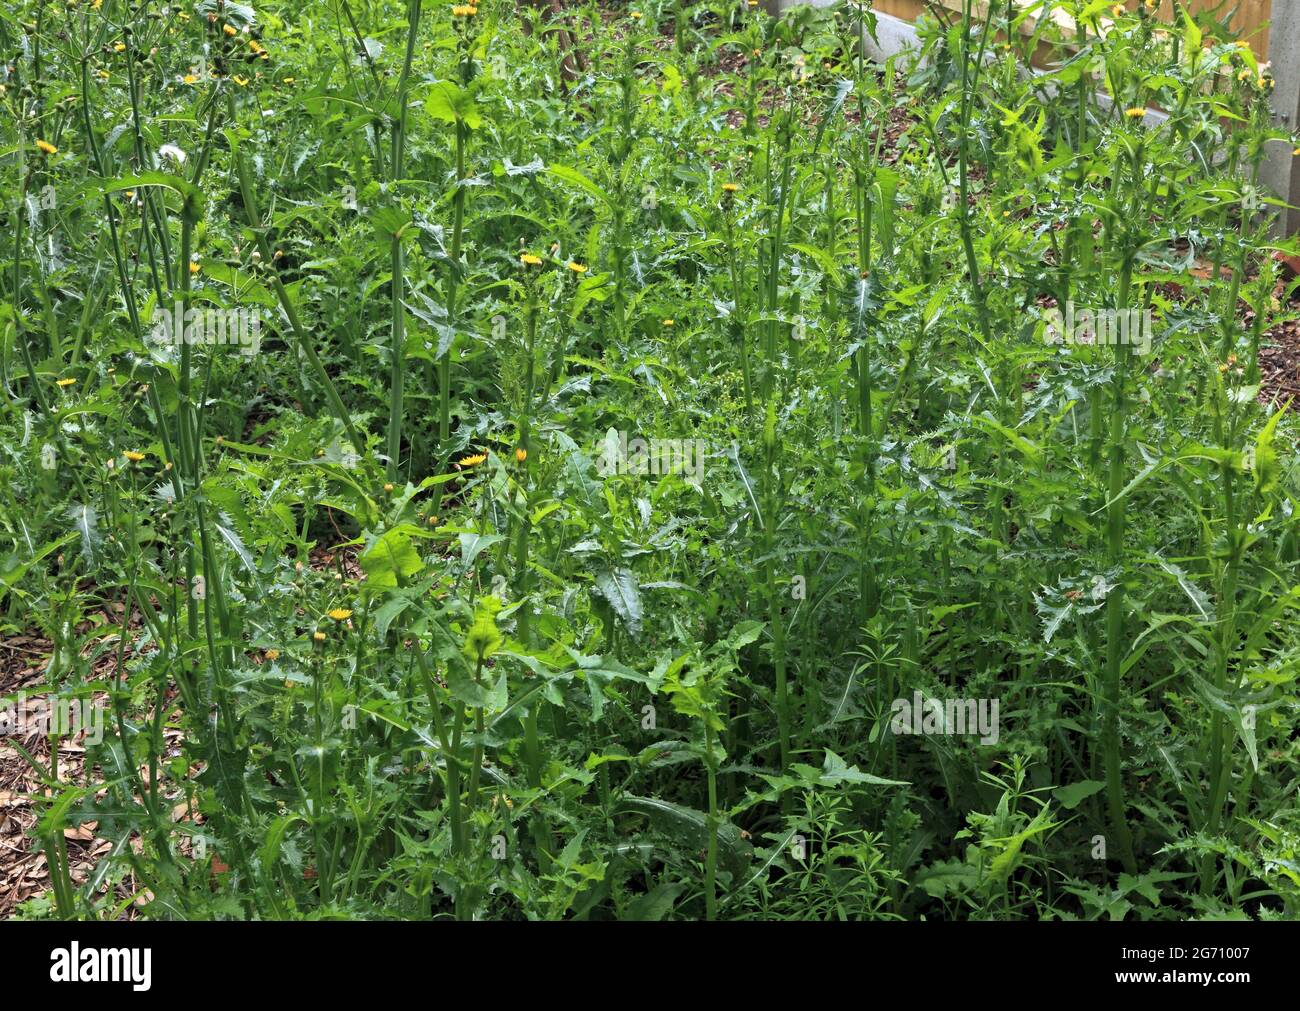 Garden, overgrown, weeds, thistles, weed, thistle, untended Stock Photo